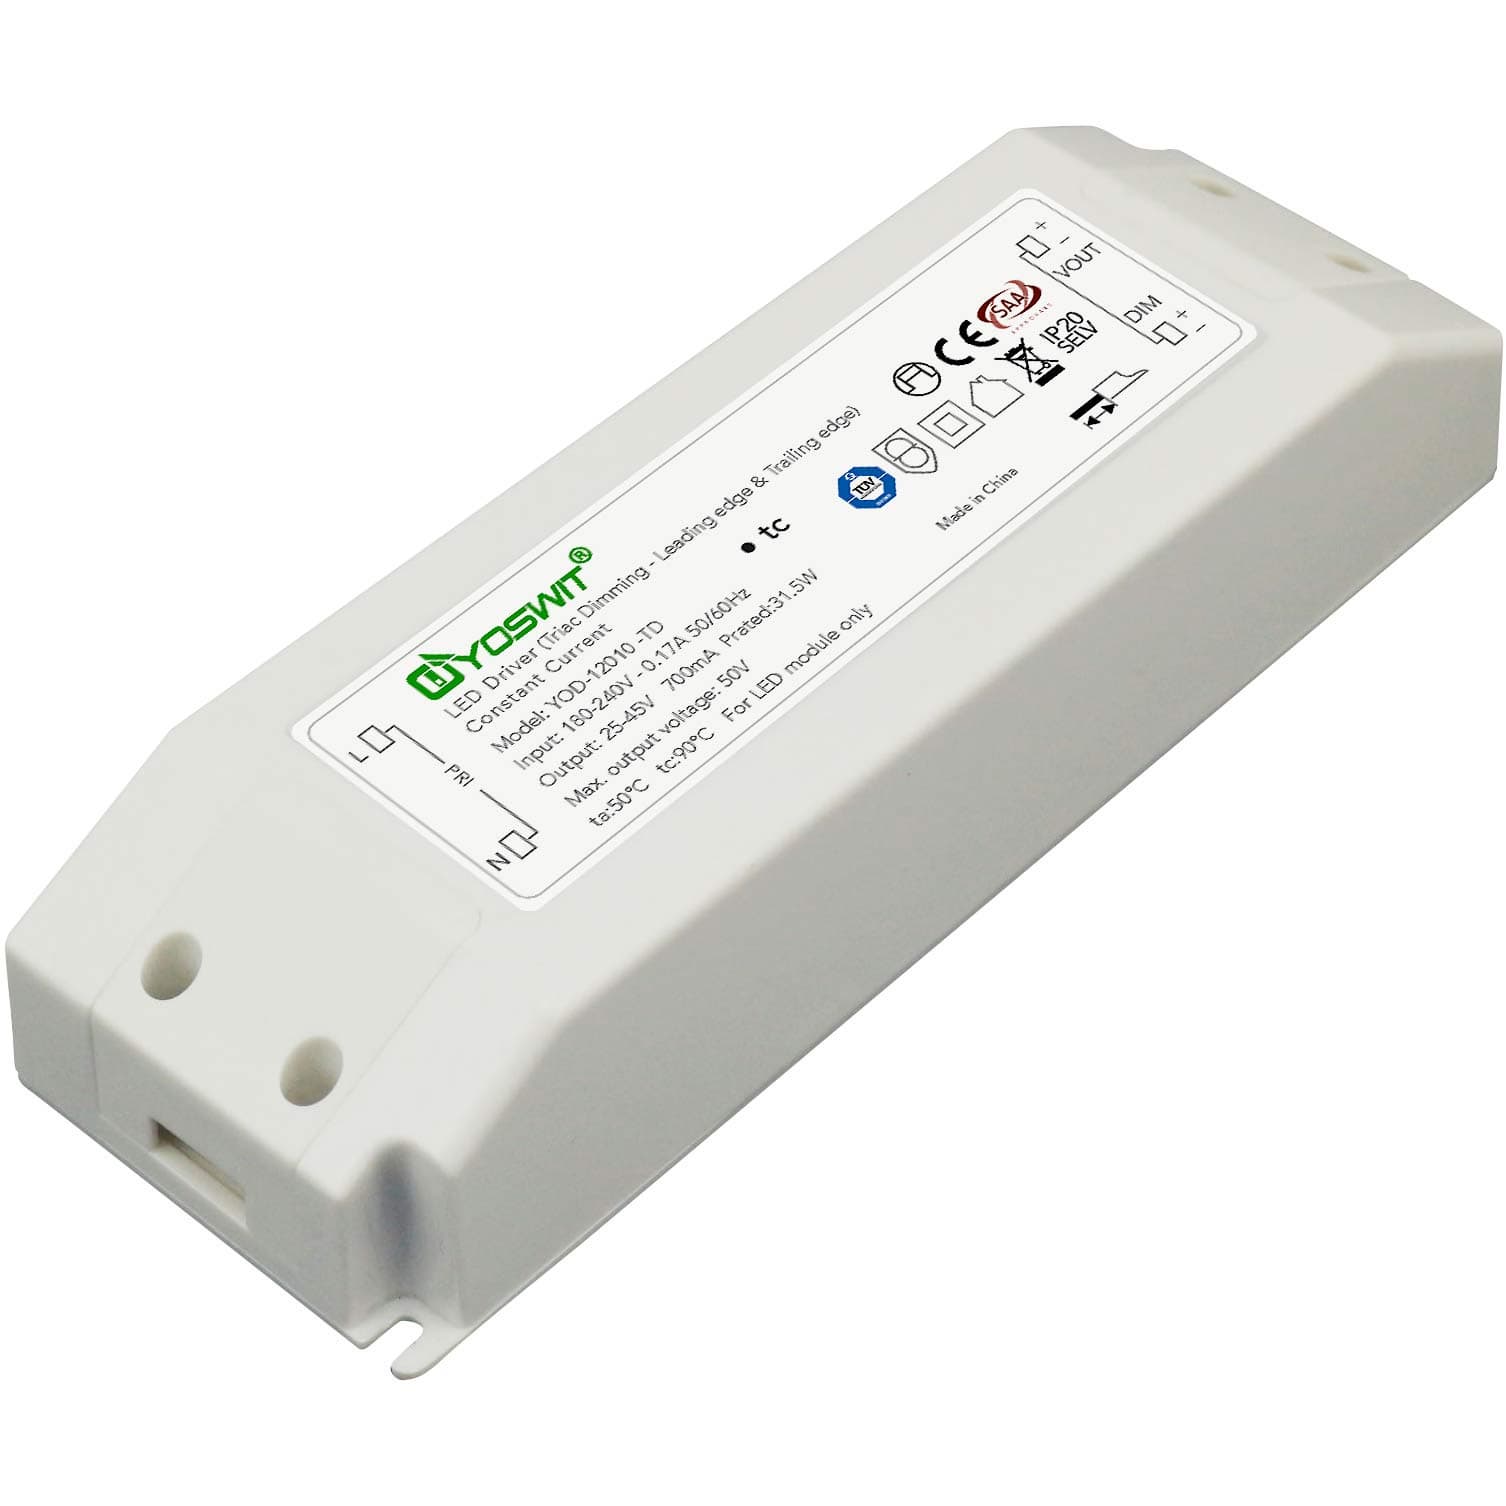 Yoswit 0_10V Dimmable Constant Voltage Driver 45W 12V